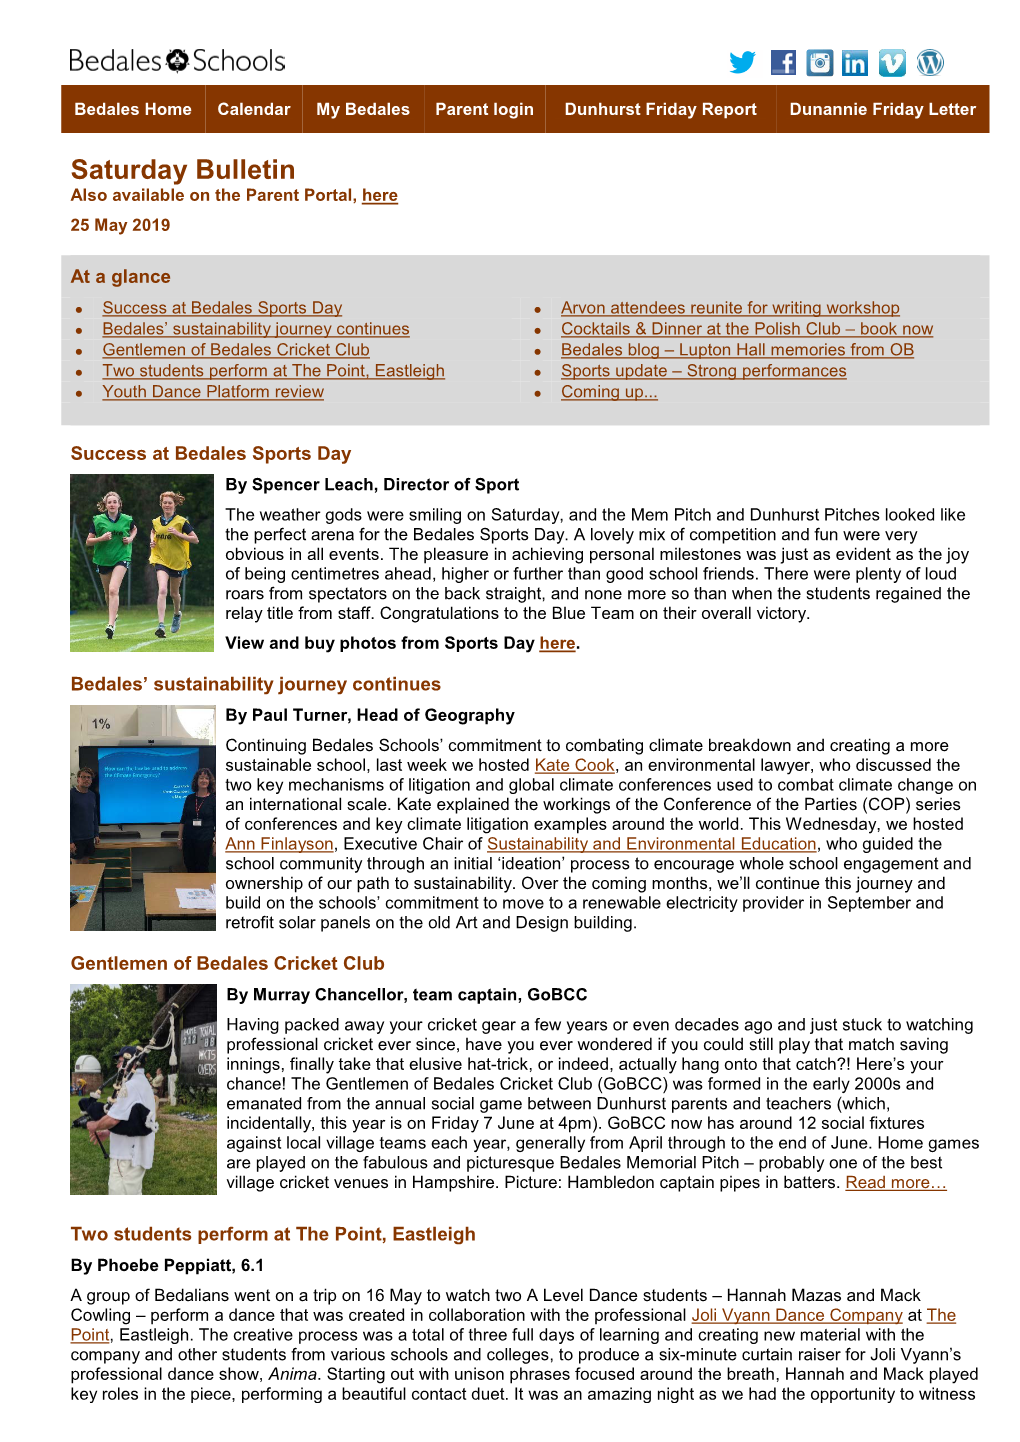 Saturday Bulletin Also Available on the Parent Portal, Here 25 May 2019